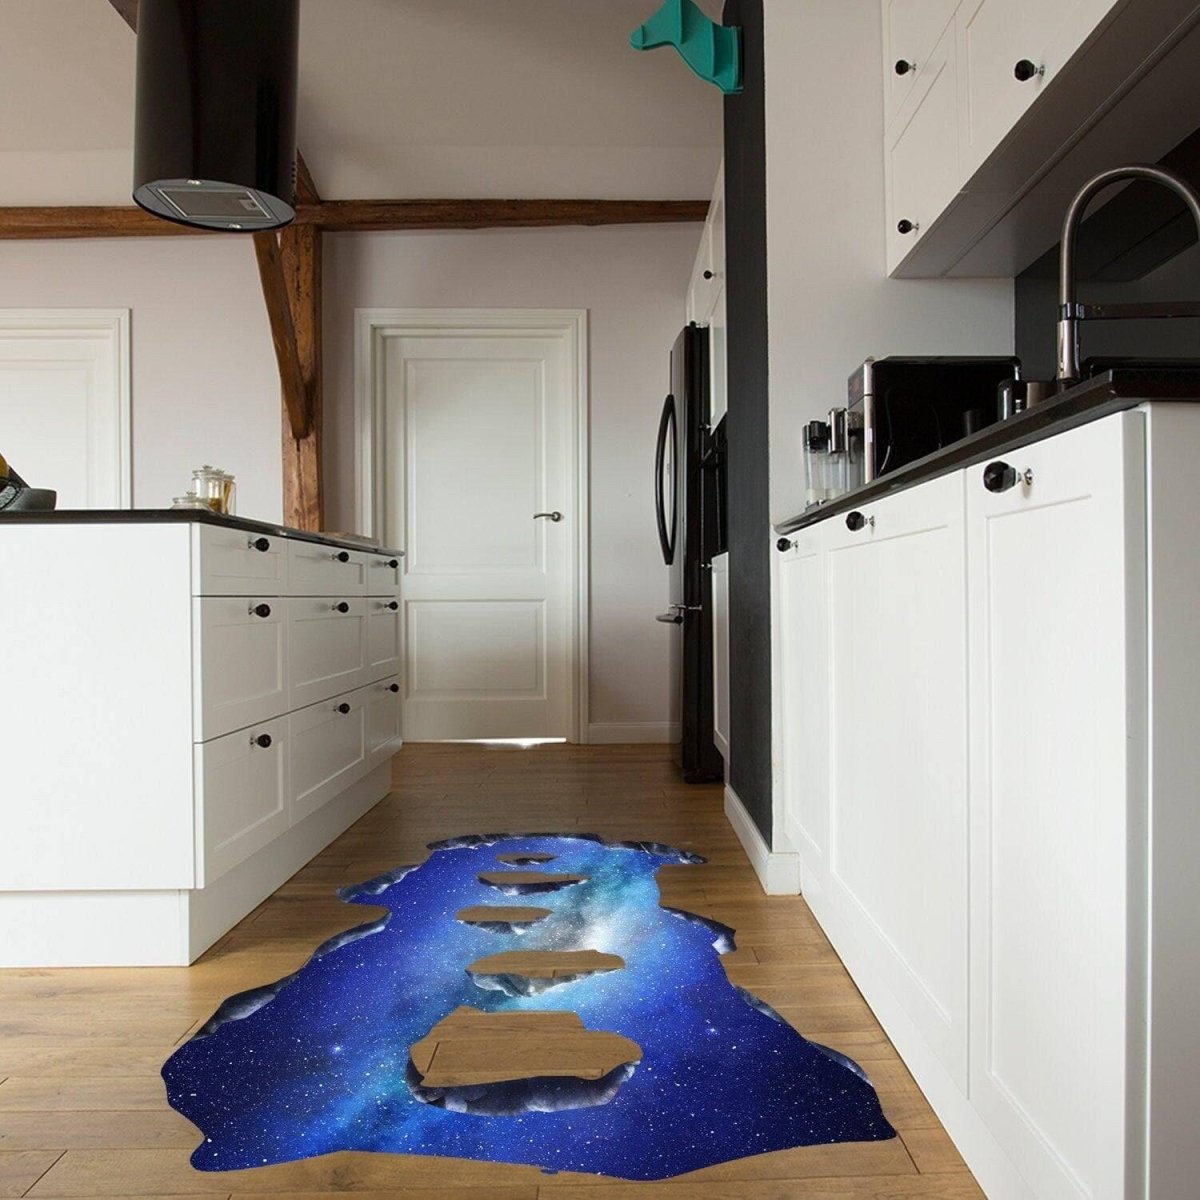 Galactic Skyway Floor Decal - Transform Your Space with a Celestial Journey - Decords